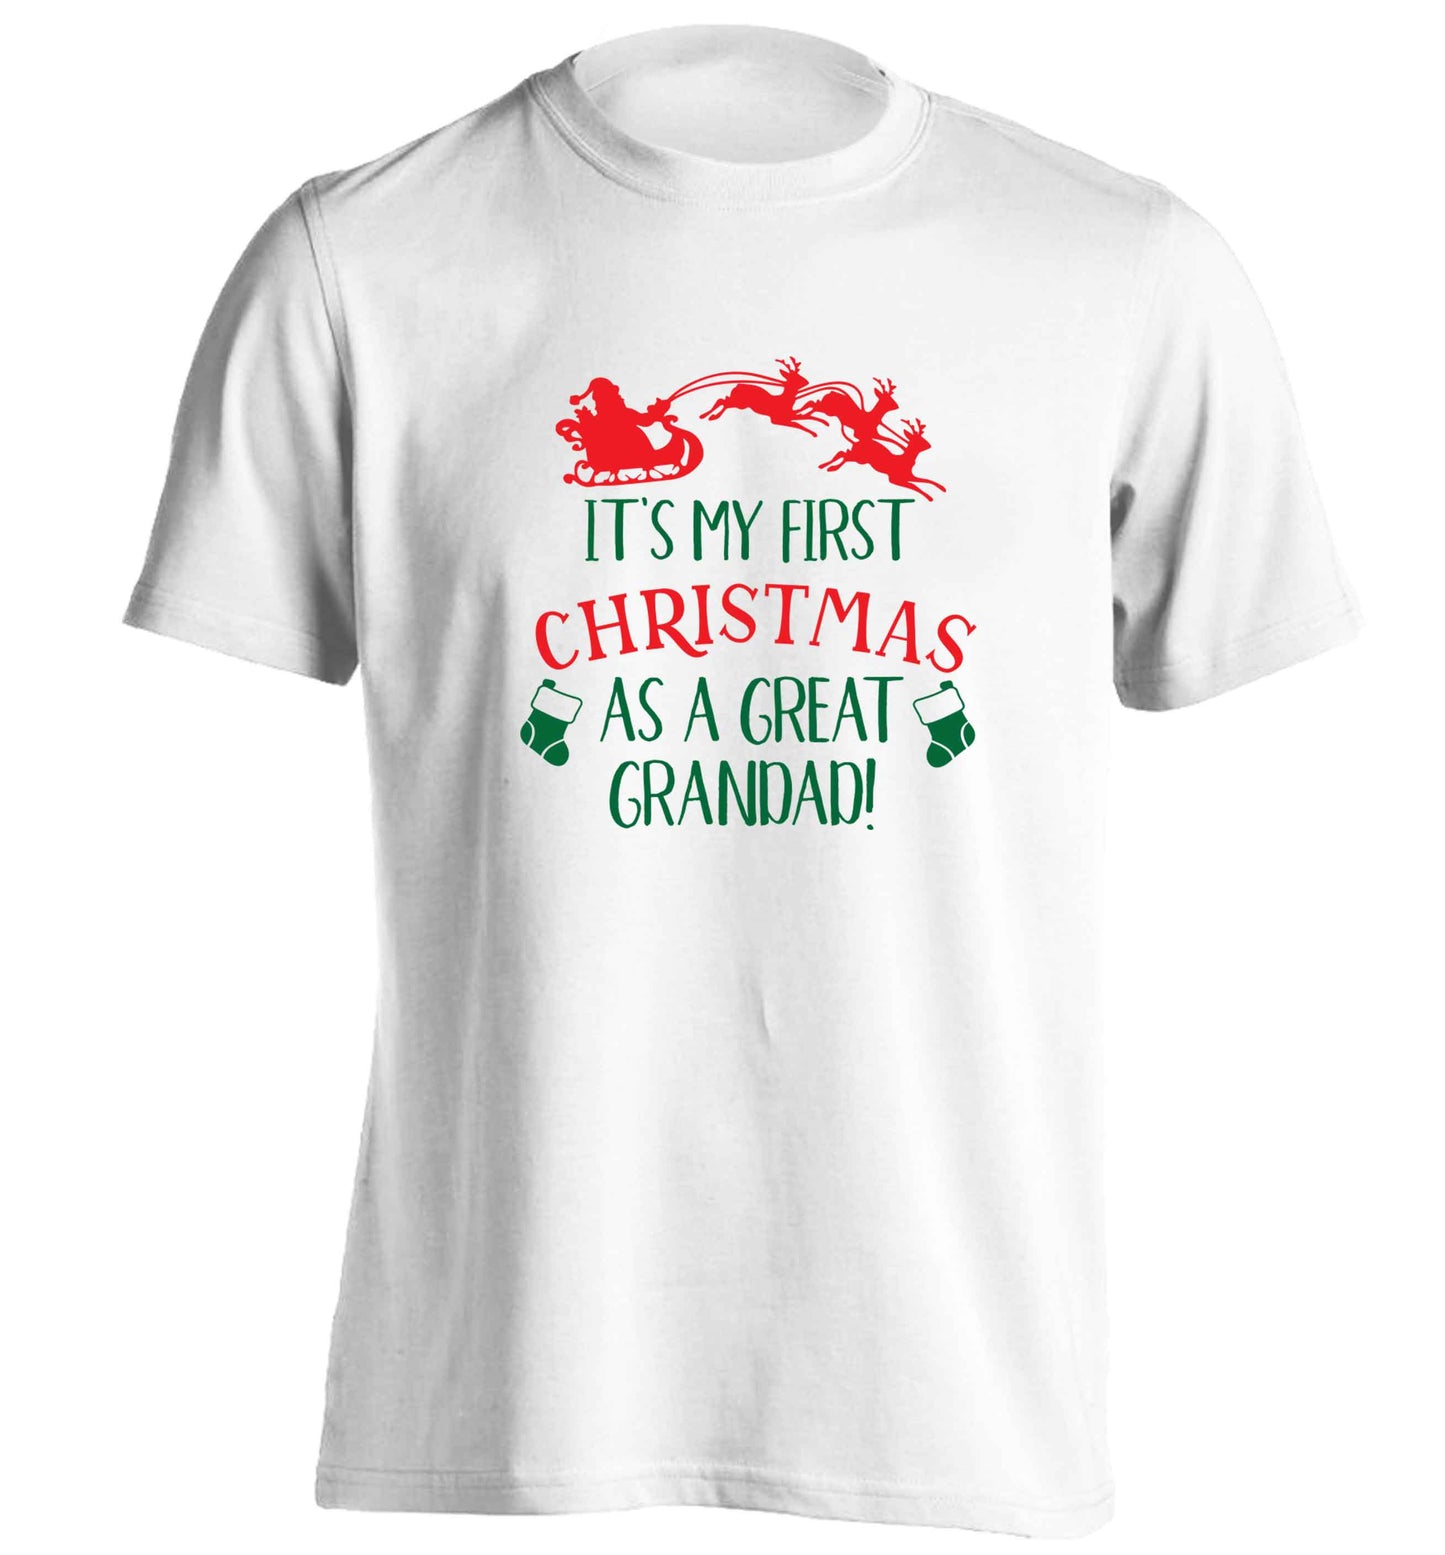 It's my first Christmas as a great grandad! adults unisex white Tshirt 2XL